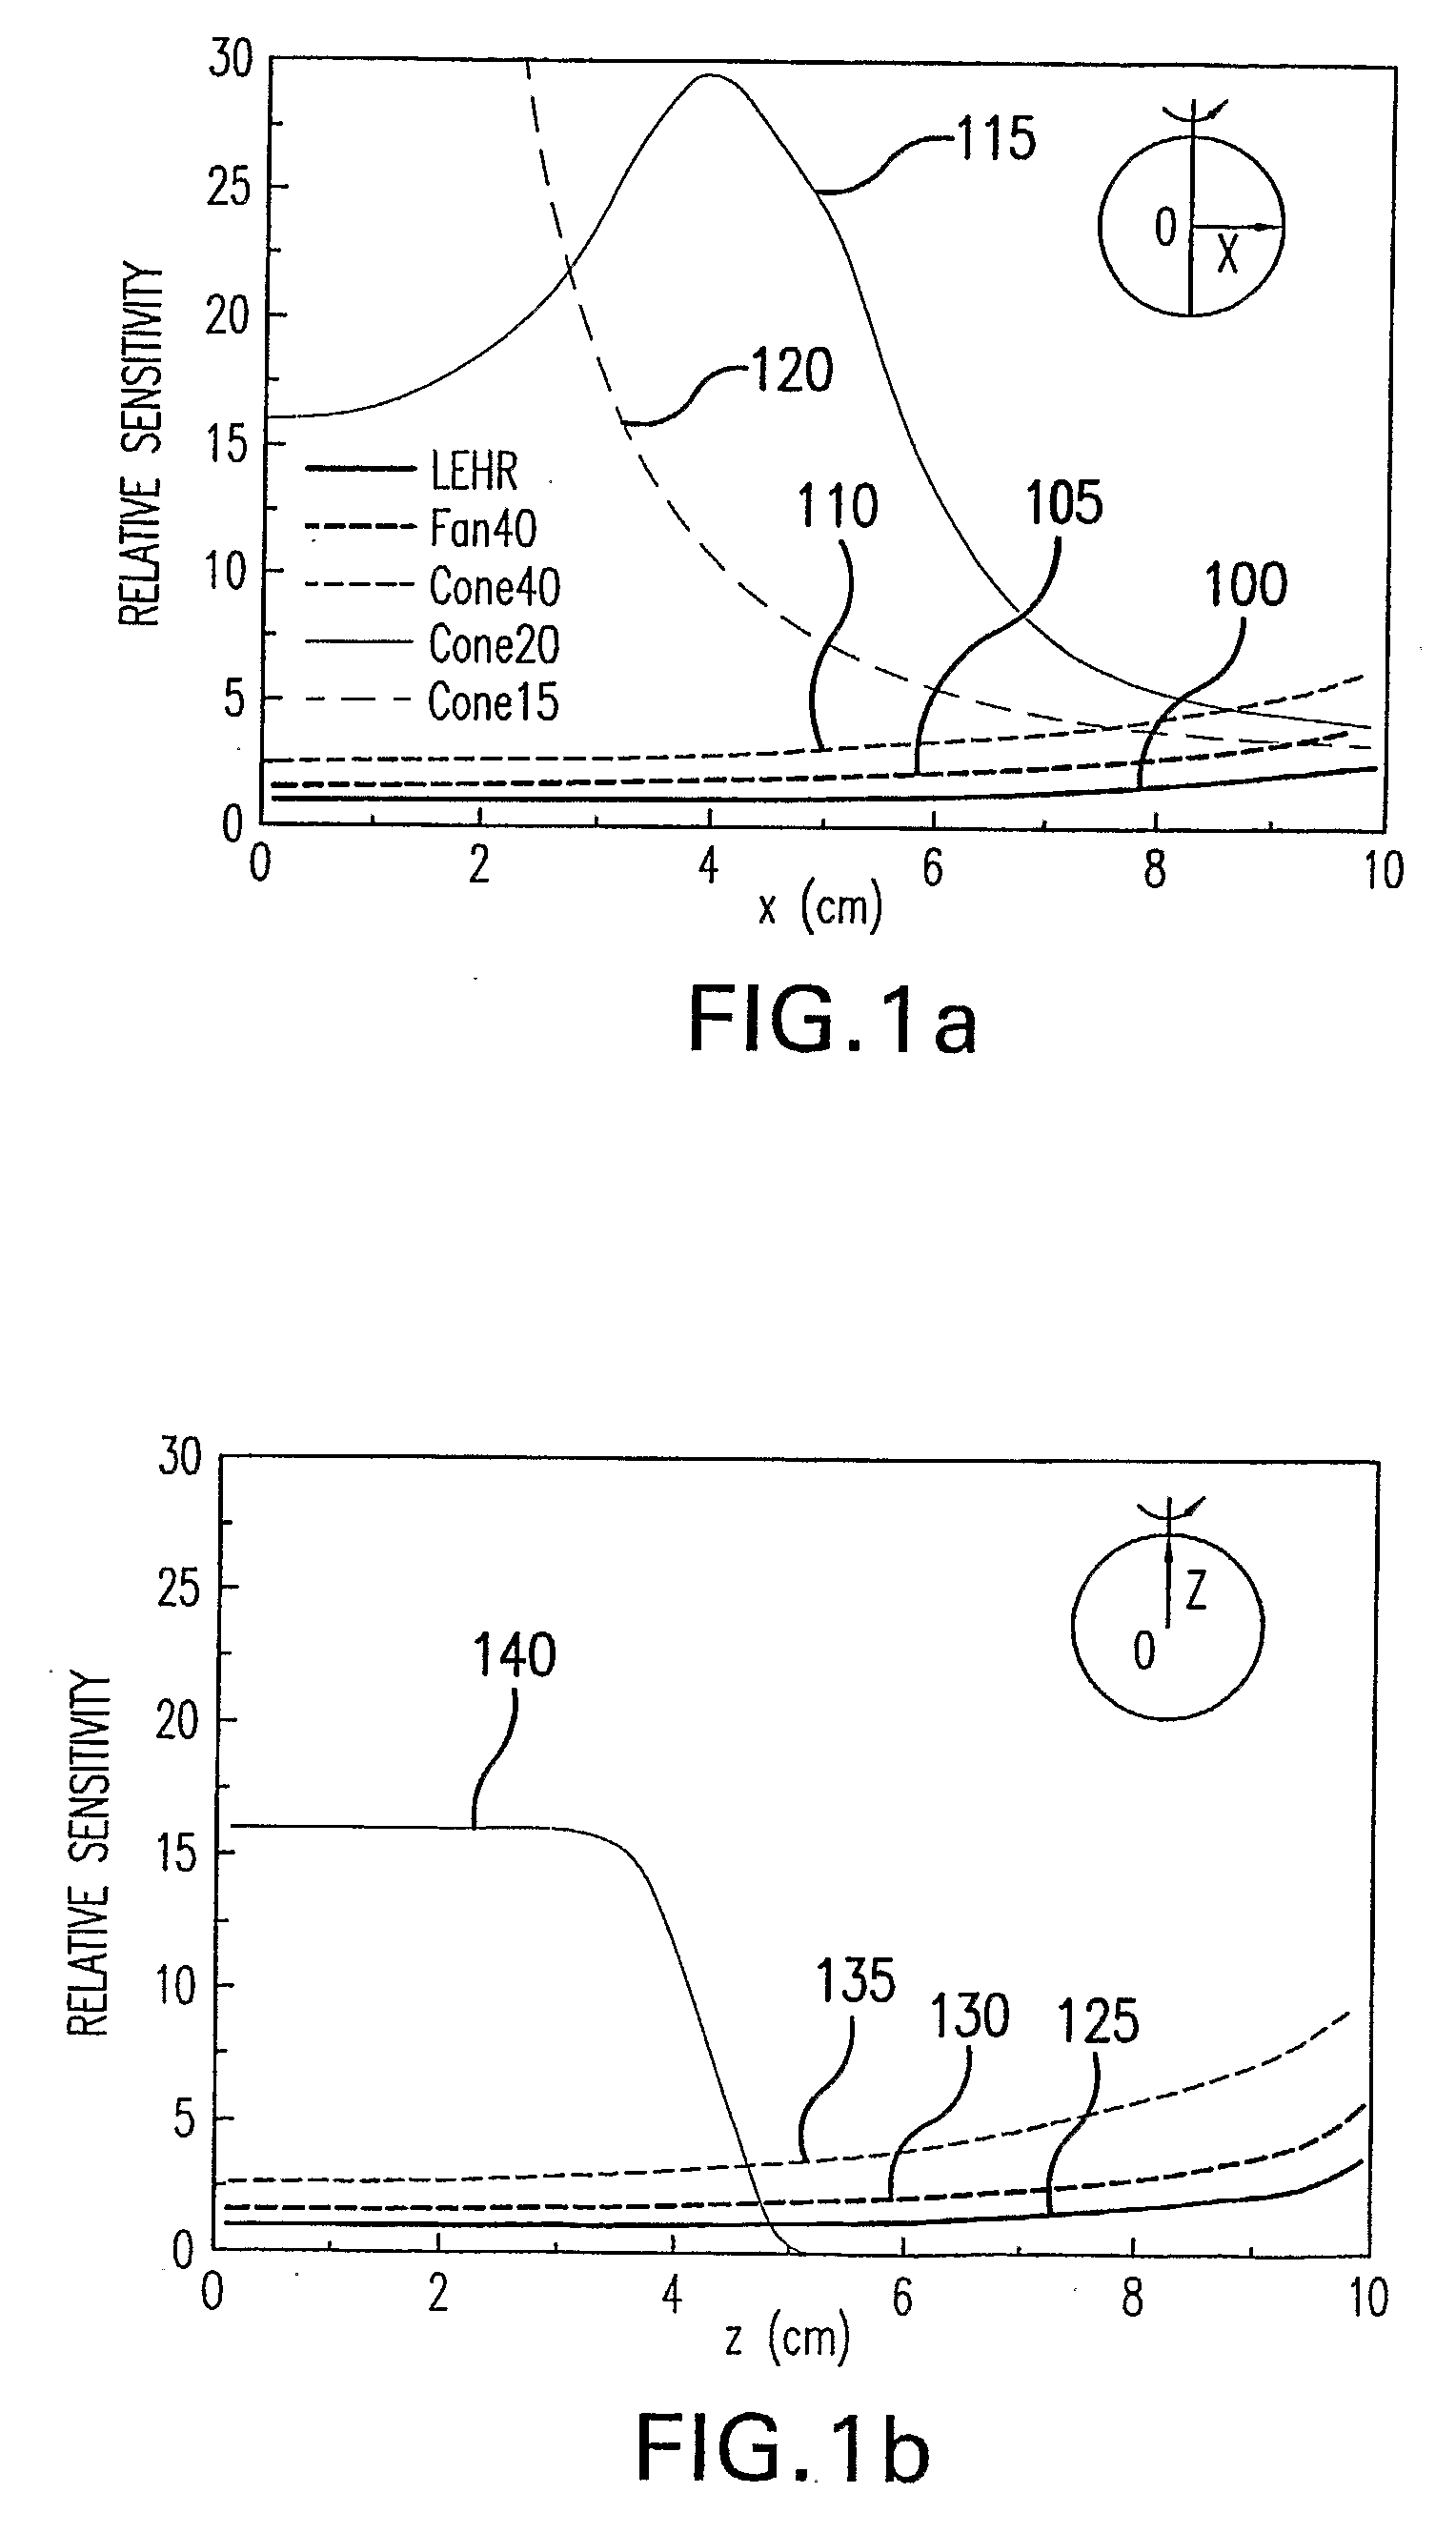 System and Method for Performing Single Photon Emission Computed Tomography (Spect) with a Focal-Length Cone-Beam Collimation